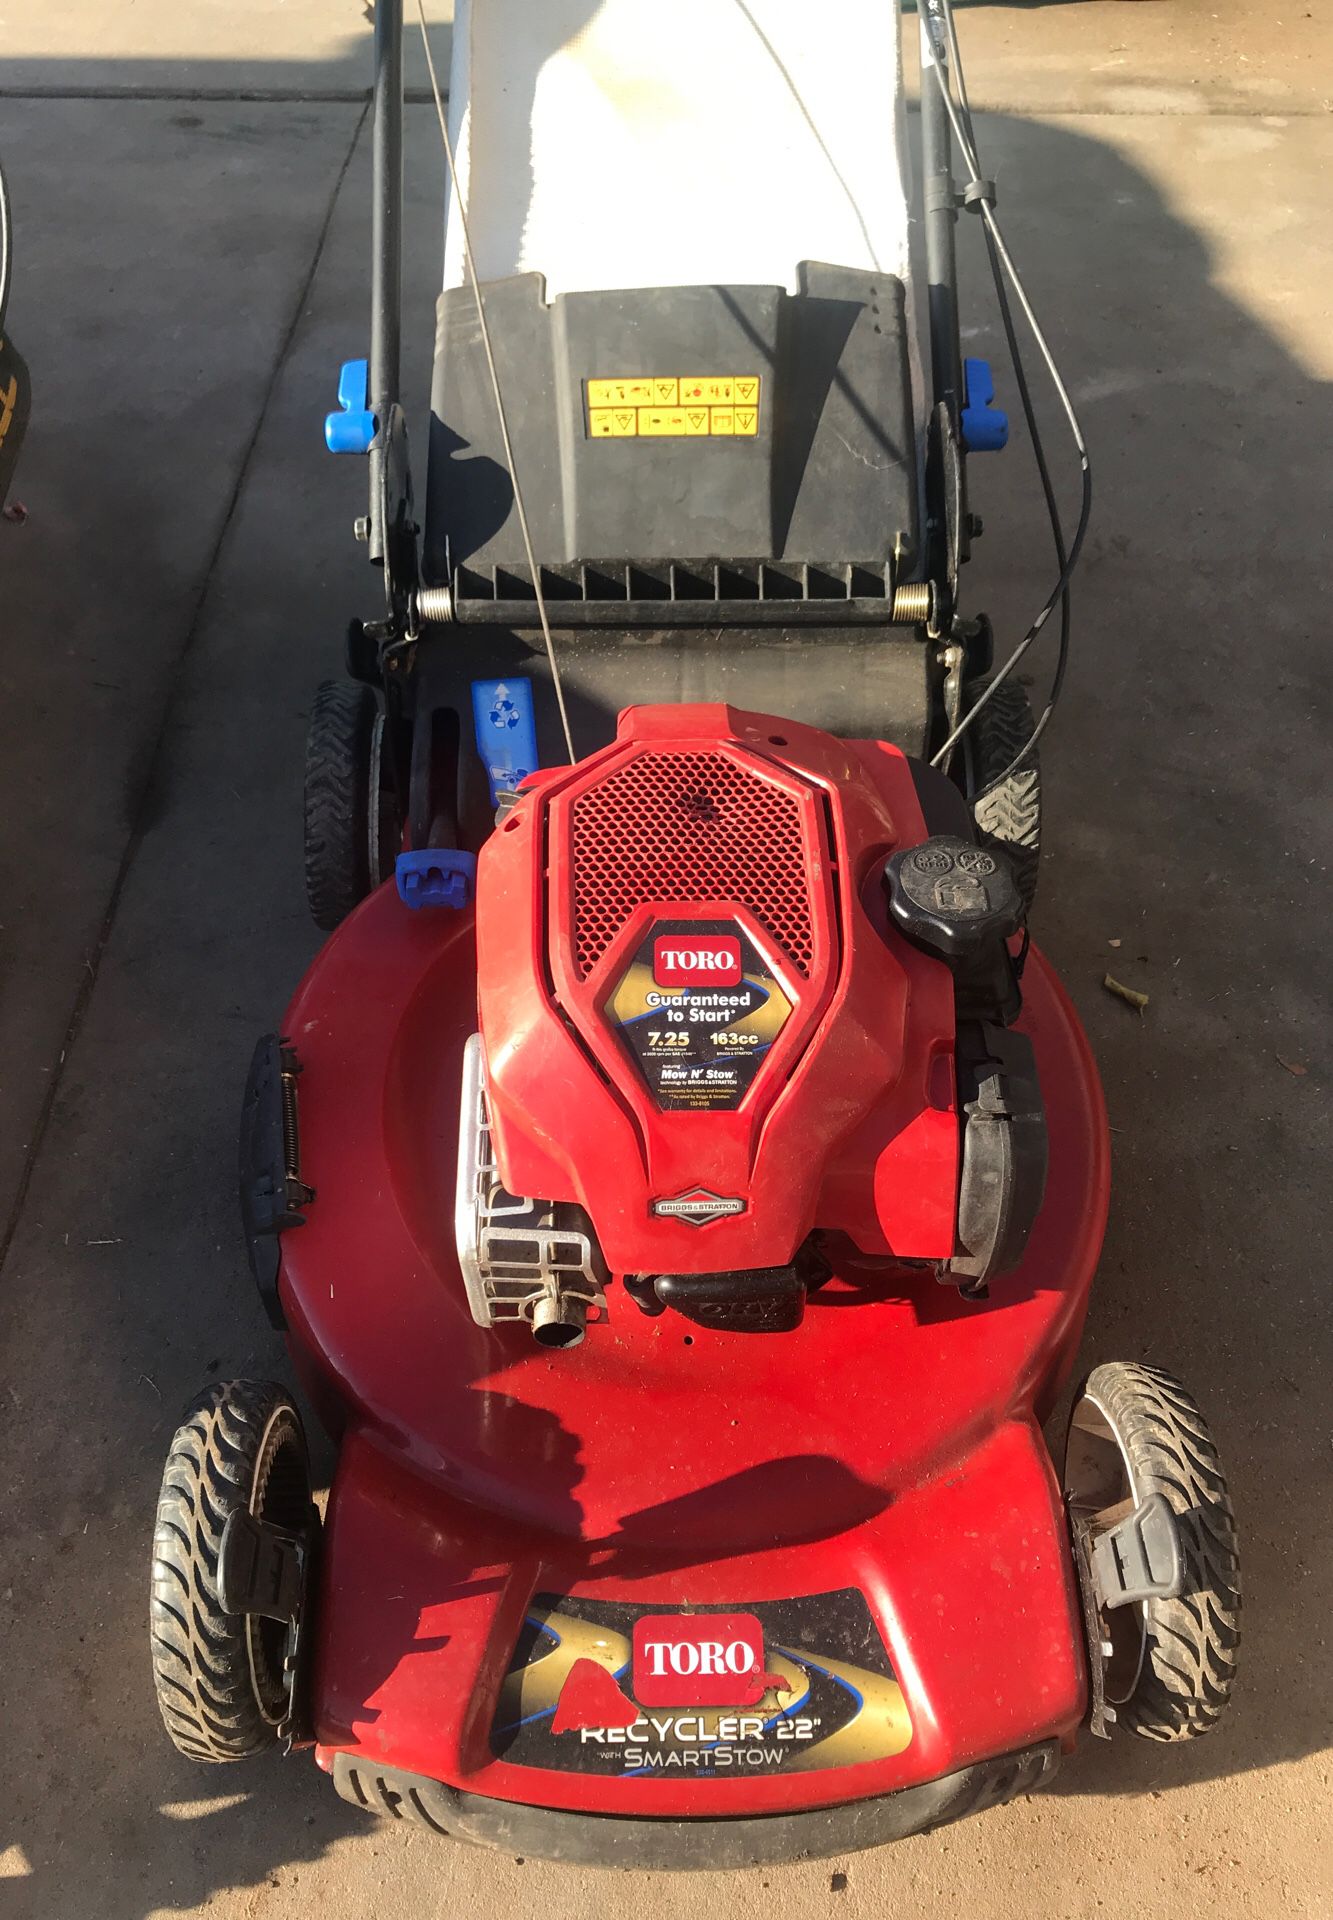 Toro 7.25hp personal pace smart stow lawn mower